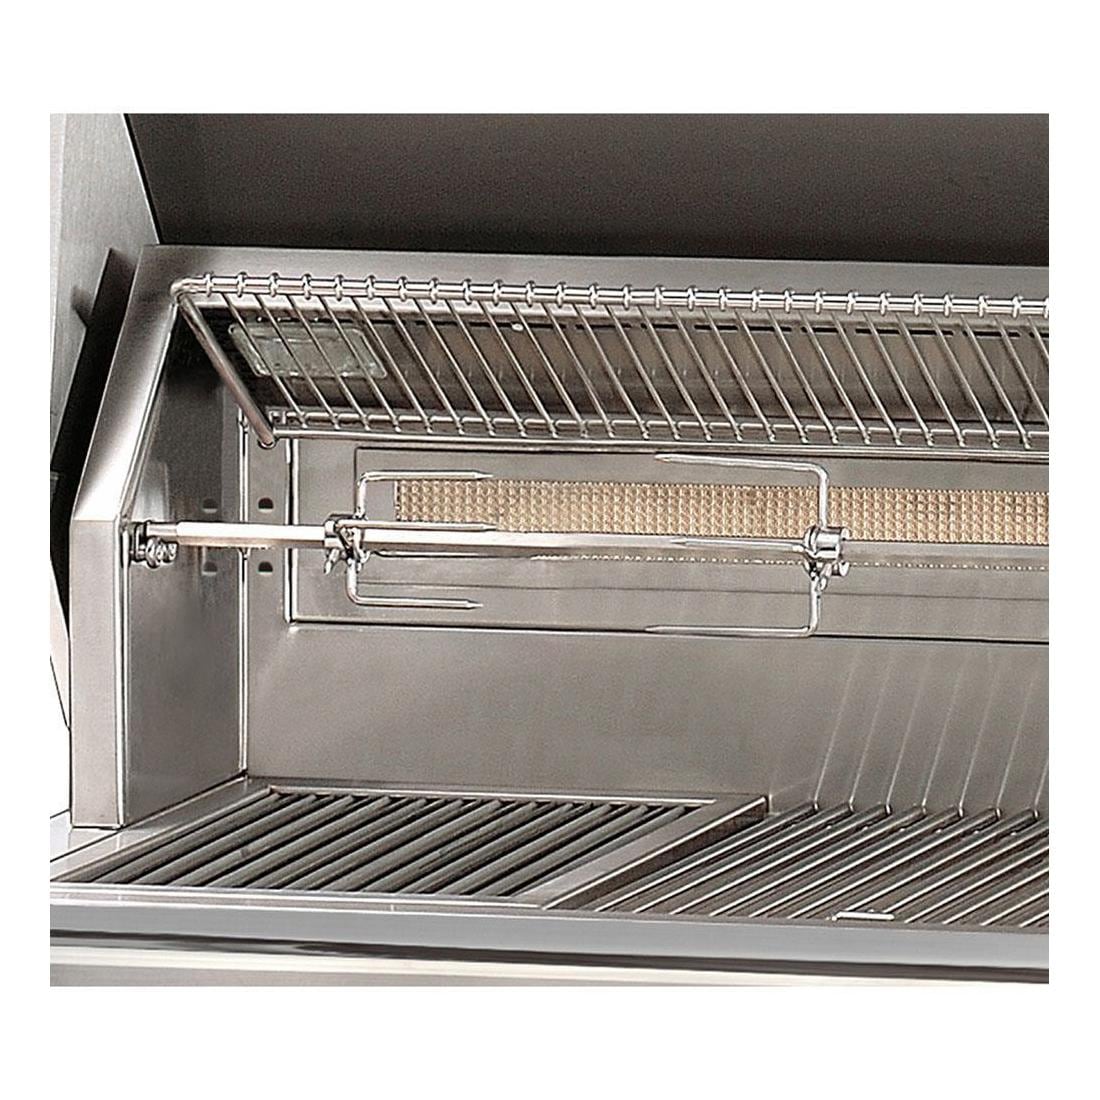 Alfresco ALXE 30-Inch Built-In Natural Gas Grill With Rotisserie in Signal White Matte